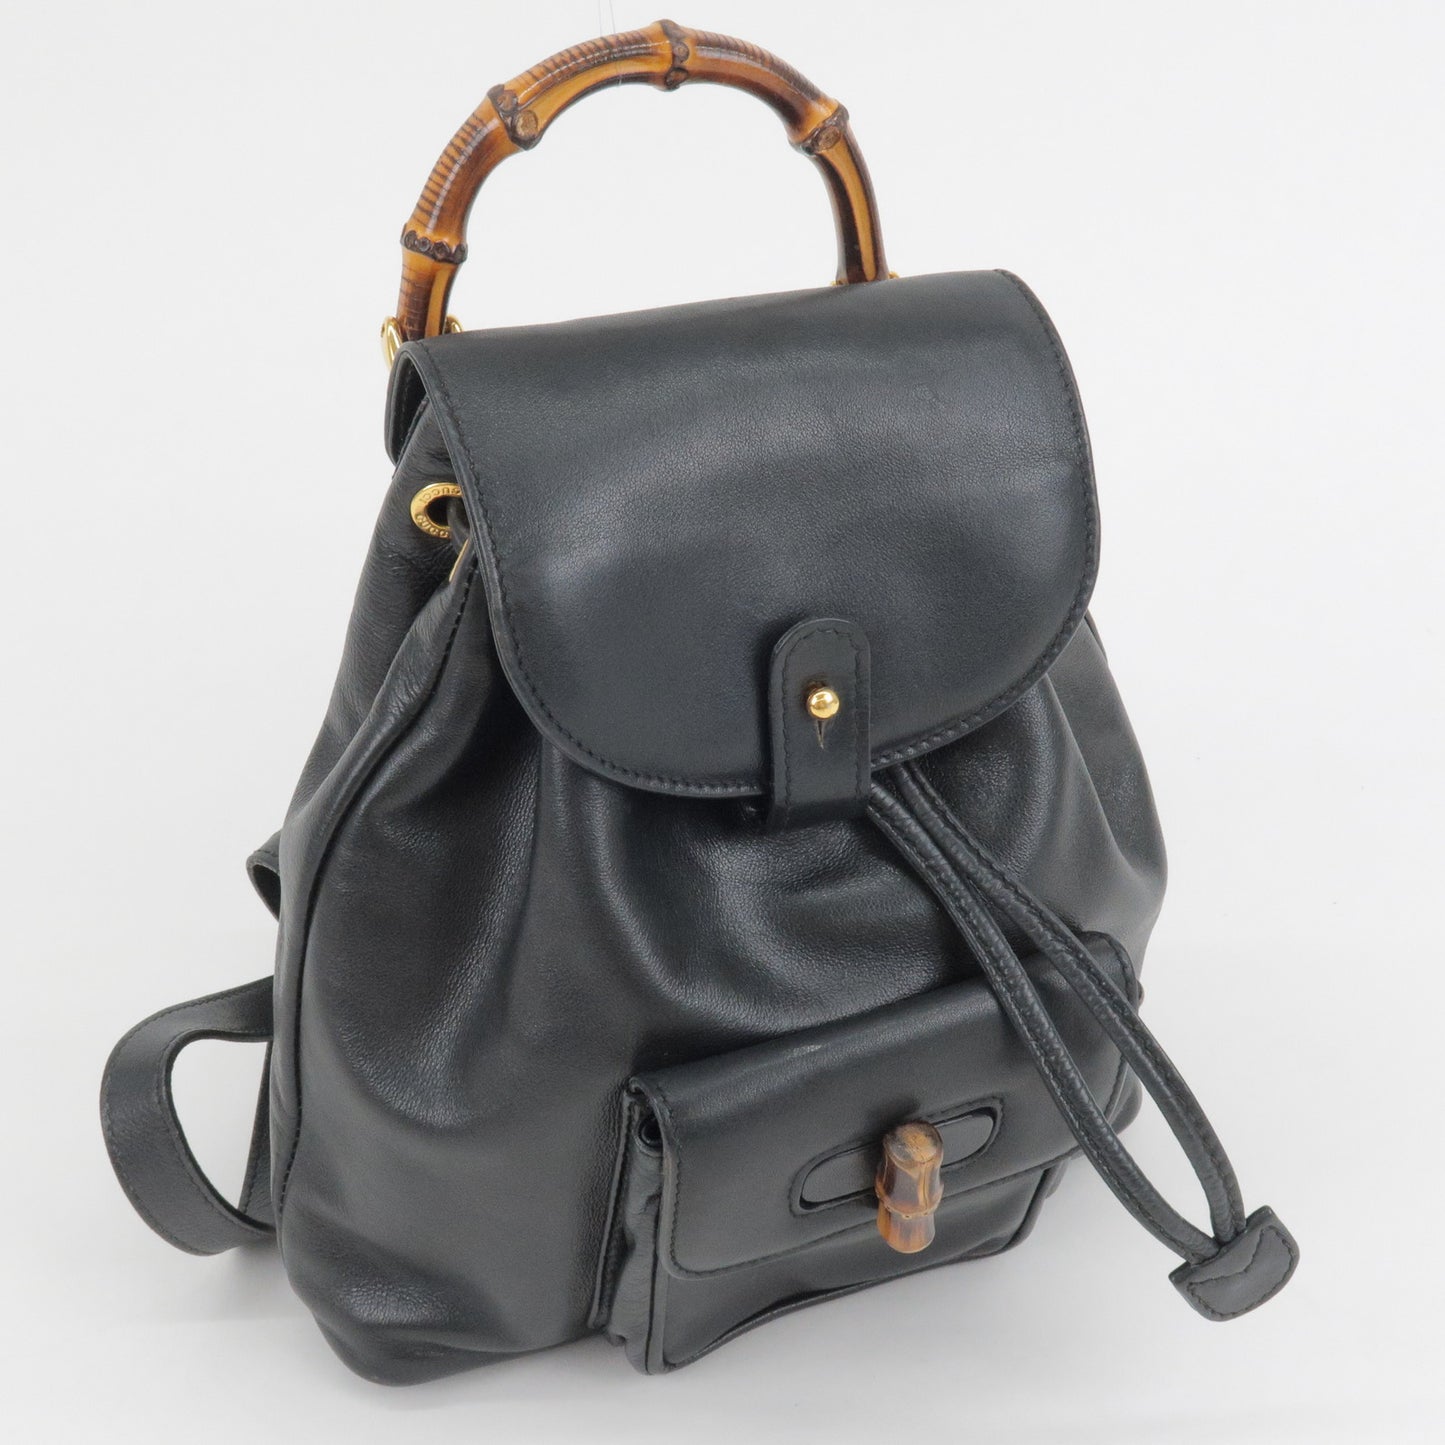 GUCCI Leather Bamboo Back Pack Ruck Sack Black 003.1705.0030